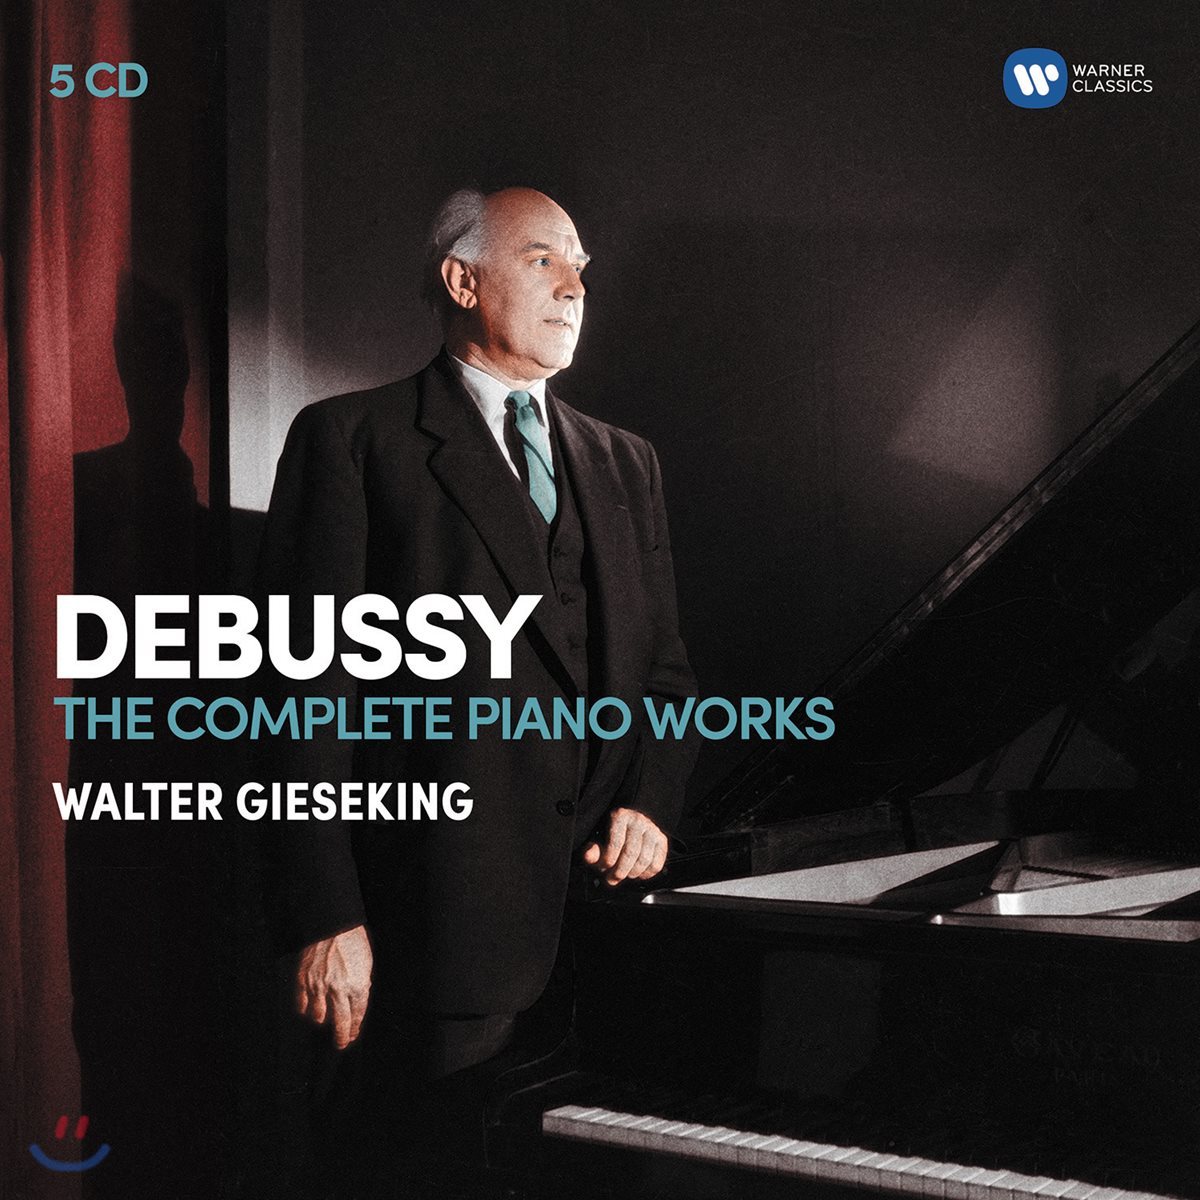 Walter Gieseking 드뷔시: 피아노 작품 전집 - 발터 기제킹 (Debussy: The Complete Piano Works)